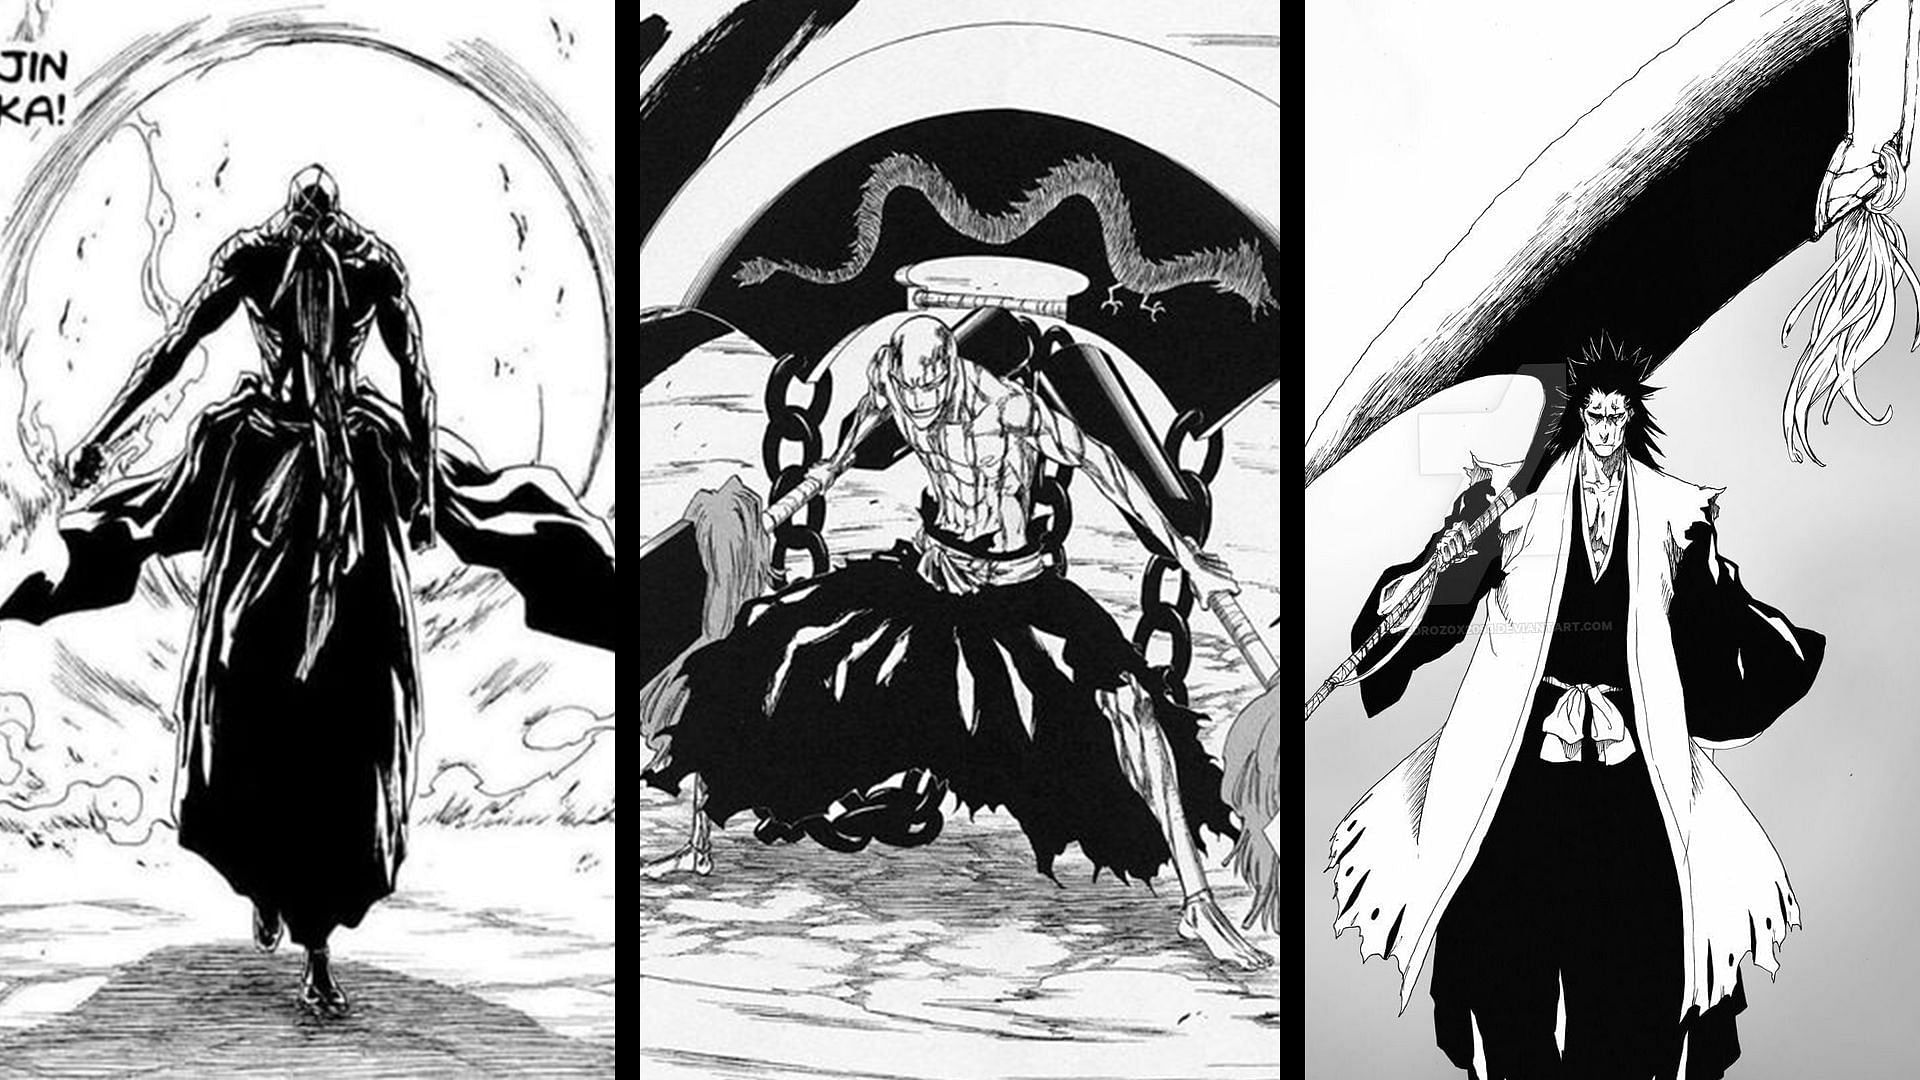 Bleach: 5 Zanpakuto Who Get Along With Their Shinigami (& 5 Who Don't)